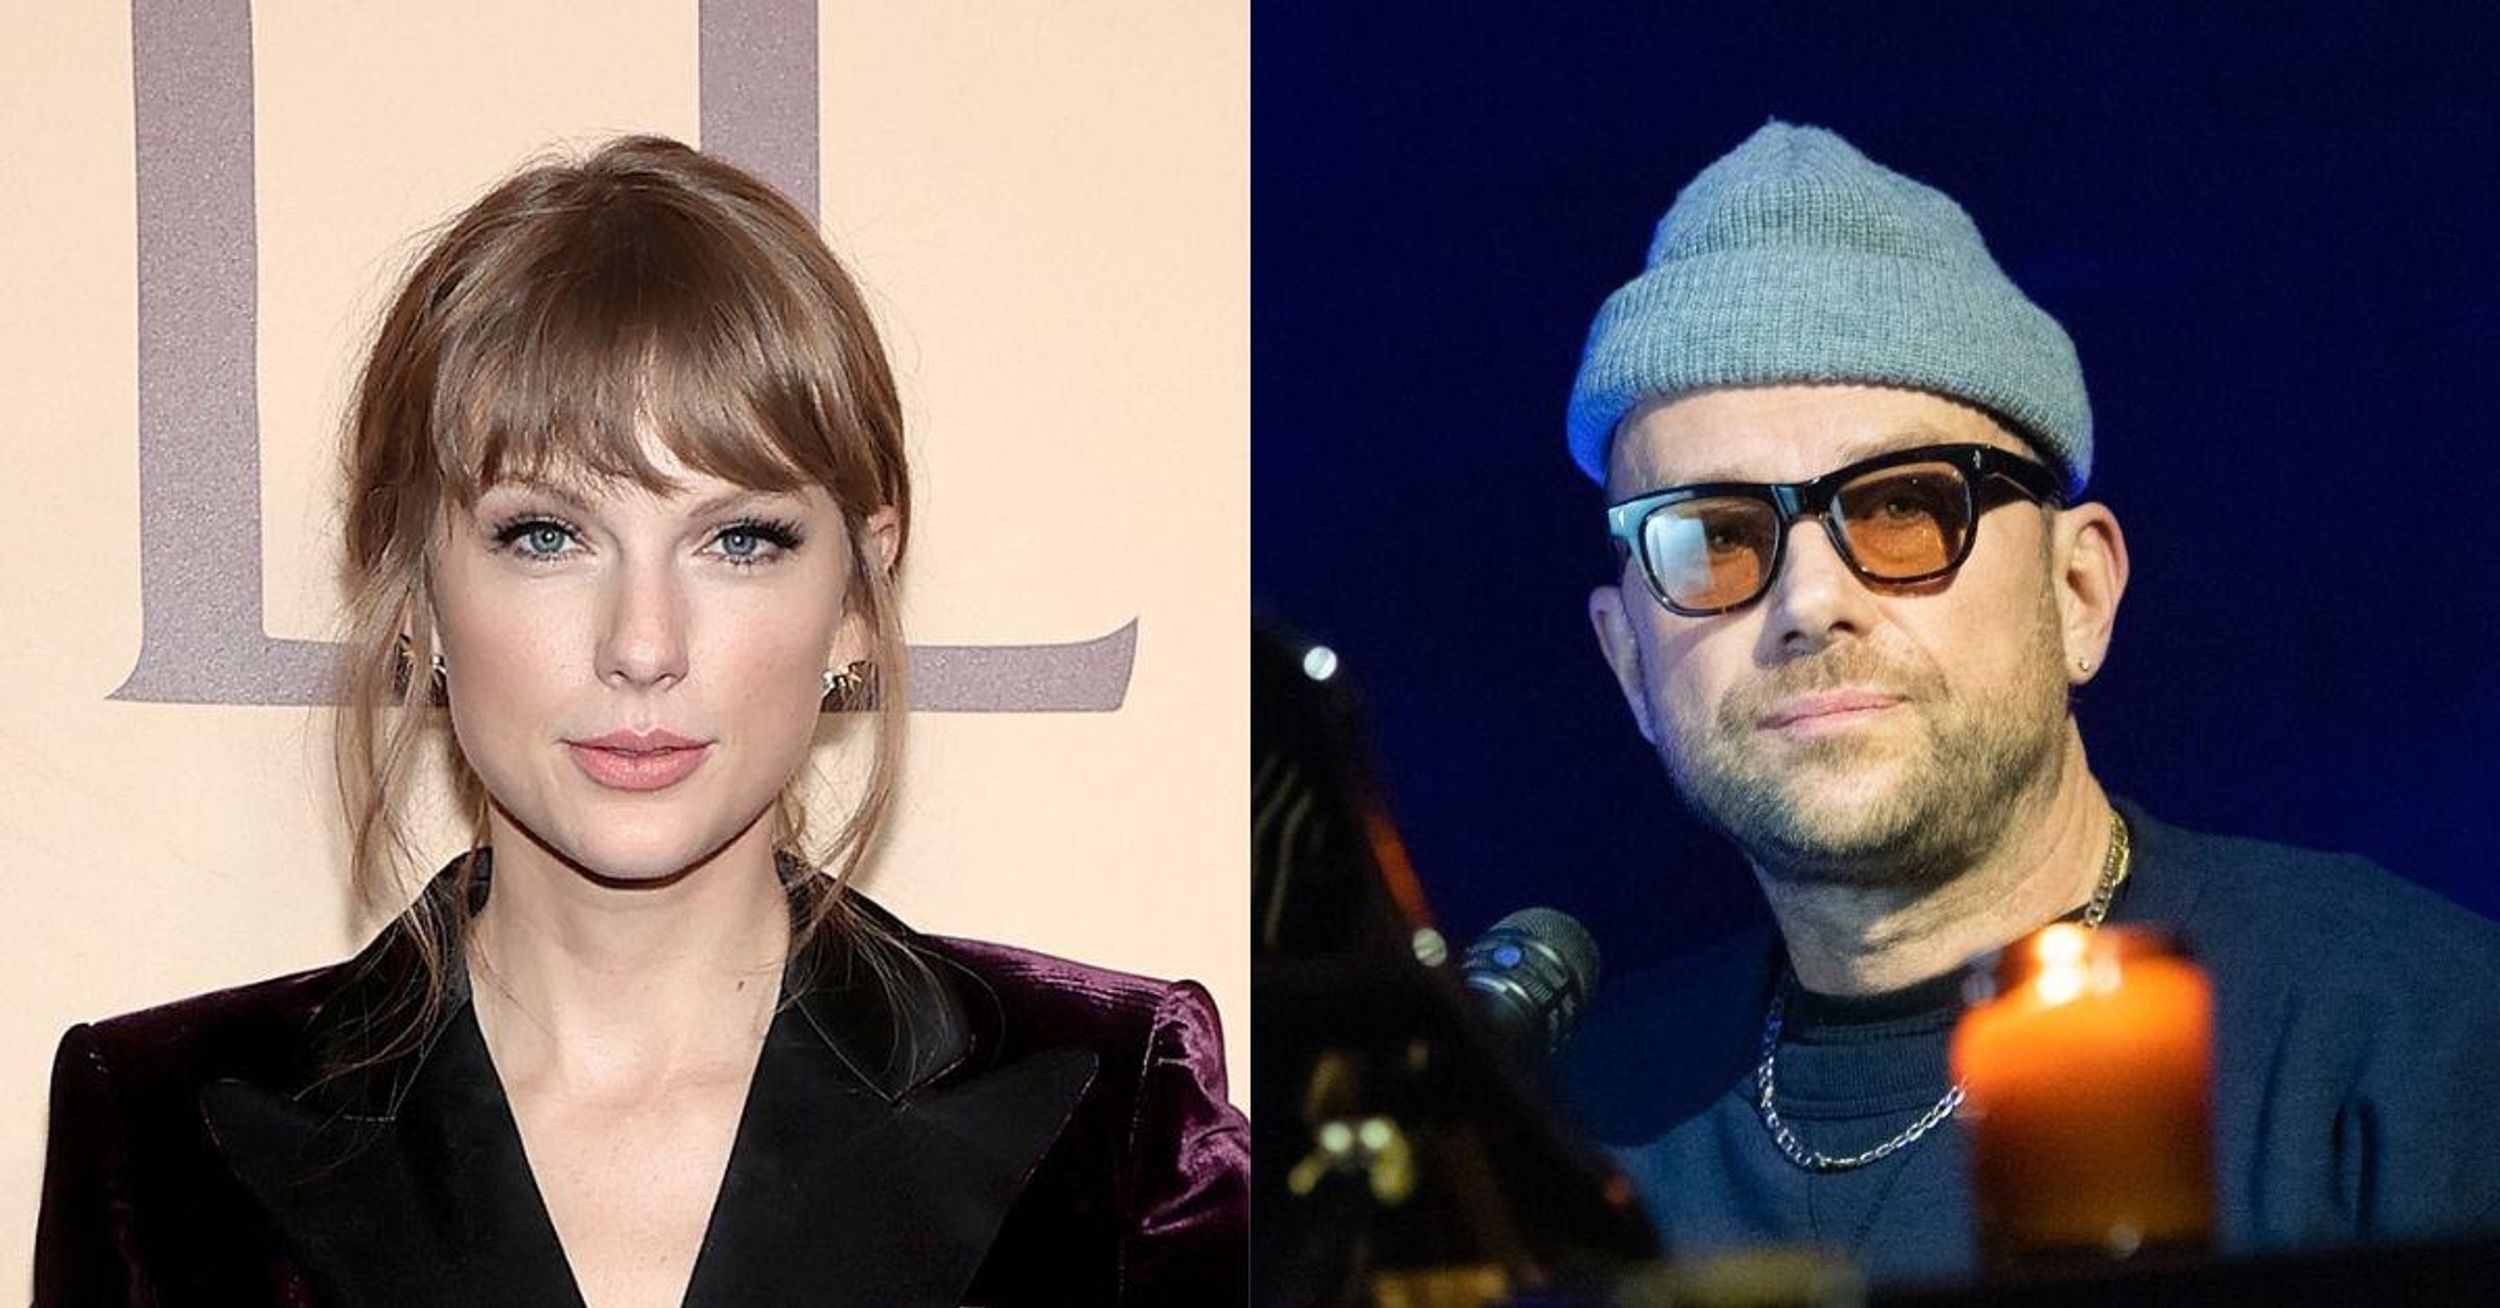 Taylor Swift Rips Gorillaz Frontman For Claiming She Doesn't Write Her Own Songs In Blistering Takedown